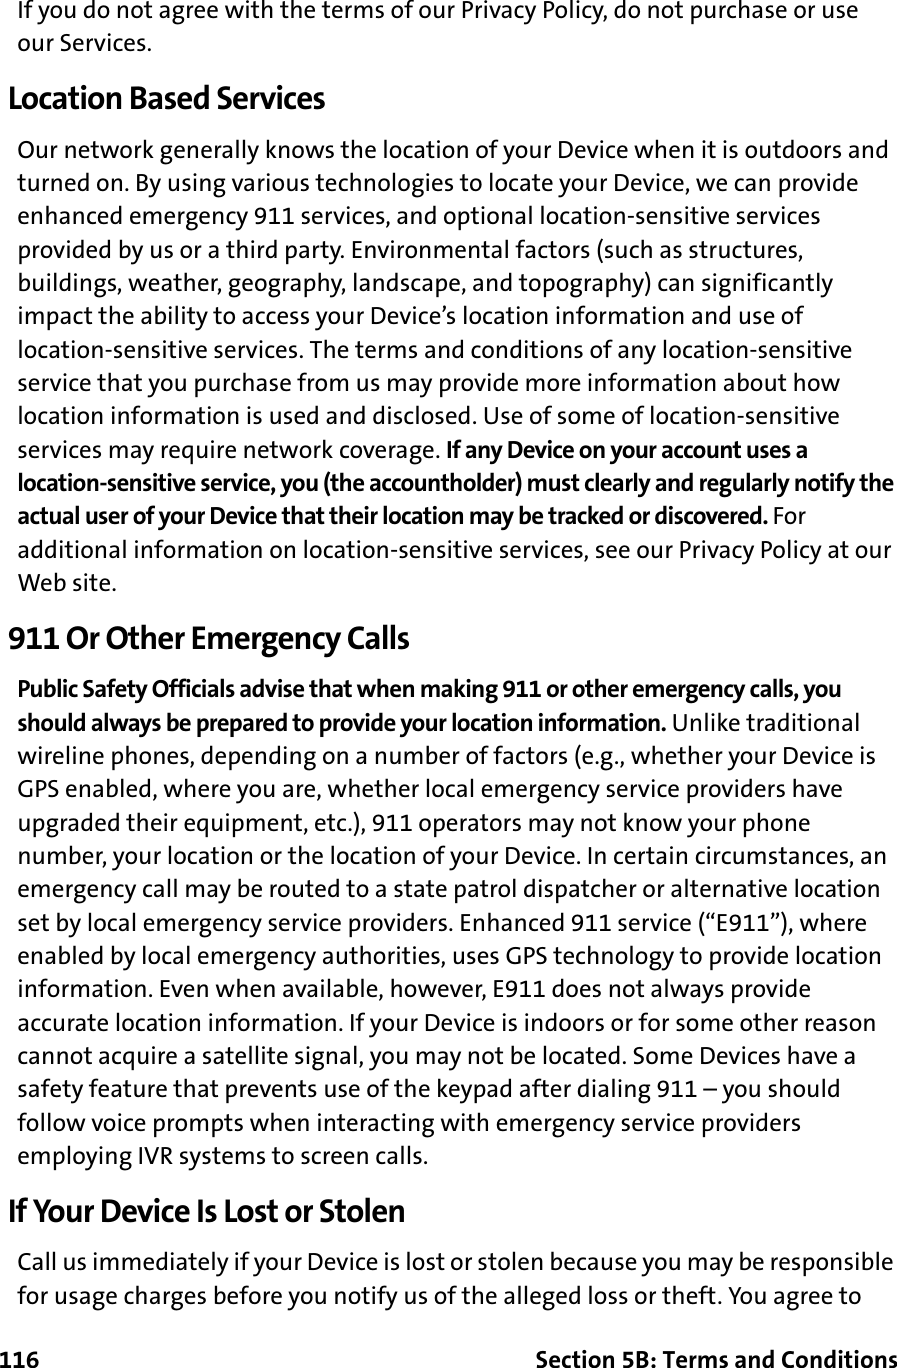 116 Section 5B: Terms and ConditionsIf you do not agree with the terms of our Privacy Policy, do not purchase or use our Services.Location Based ServicesOur network generally knows the location of your Device when it is outdoors and turned on. By using various technologies to locate your Device, we can provide enhanced emergency 911 services, and optional location-sensitive services provided by us or a third party. Environmental factors (such as structures, buildings, weather, geography, landscape, and topography) can significantly impact the ability to access your Device’s location information and use of location-sensitive services. The terms and conditions of any location-sensitive service that you purchase from us may provide more information about how location information is used and disclosed. Use of some of location-sensitive services may require network coverage. If any Device on your account uses a location-sensitive service, you (the accountholder) must clearly and regularly notify the actual user of your Device that their location may be tracked or discovered. For additional information on location-sensitive services, see our Privacy Policy at our Web site.911 Or Other Emergency CallsPublic Safety Officials advise that when making 911 or other emergency calls, you should always be prepared to provide your location information. Unlike traditional wireline phones, depending on a number of factors (e.g., whether your Device is GPS enabled, where you are, whether local emergency service providers have upgraded their equipment, etc.), 911 operators may not know your phone number, your location or the location of your Device. In certain circumstances, an emergency call may be routed to a state patrol dispatcher or alternative location set by local emergency service providers. Enhanced 911 service (“E911”), where enabled by local emergency authorities, uses GPS technology to provide location information. Even when available, however, E911 does not always provide accurate location information. If your Device is indoors or for some other reason cannot acquire a satellite signal, you may not be located. Some Devices have a safety feature that prevents use of the keypad after dialing 911 – you should follow voice prompts when interacting with emergency service providers employing IVR systems to screen calls.If Your Device Is Lost or StolenCall us immediately if your Device is lost or stolen because you may be responsible for usage charges before you notify us of the alleged loss or theft. You agree to 